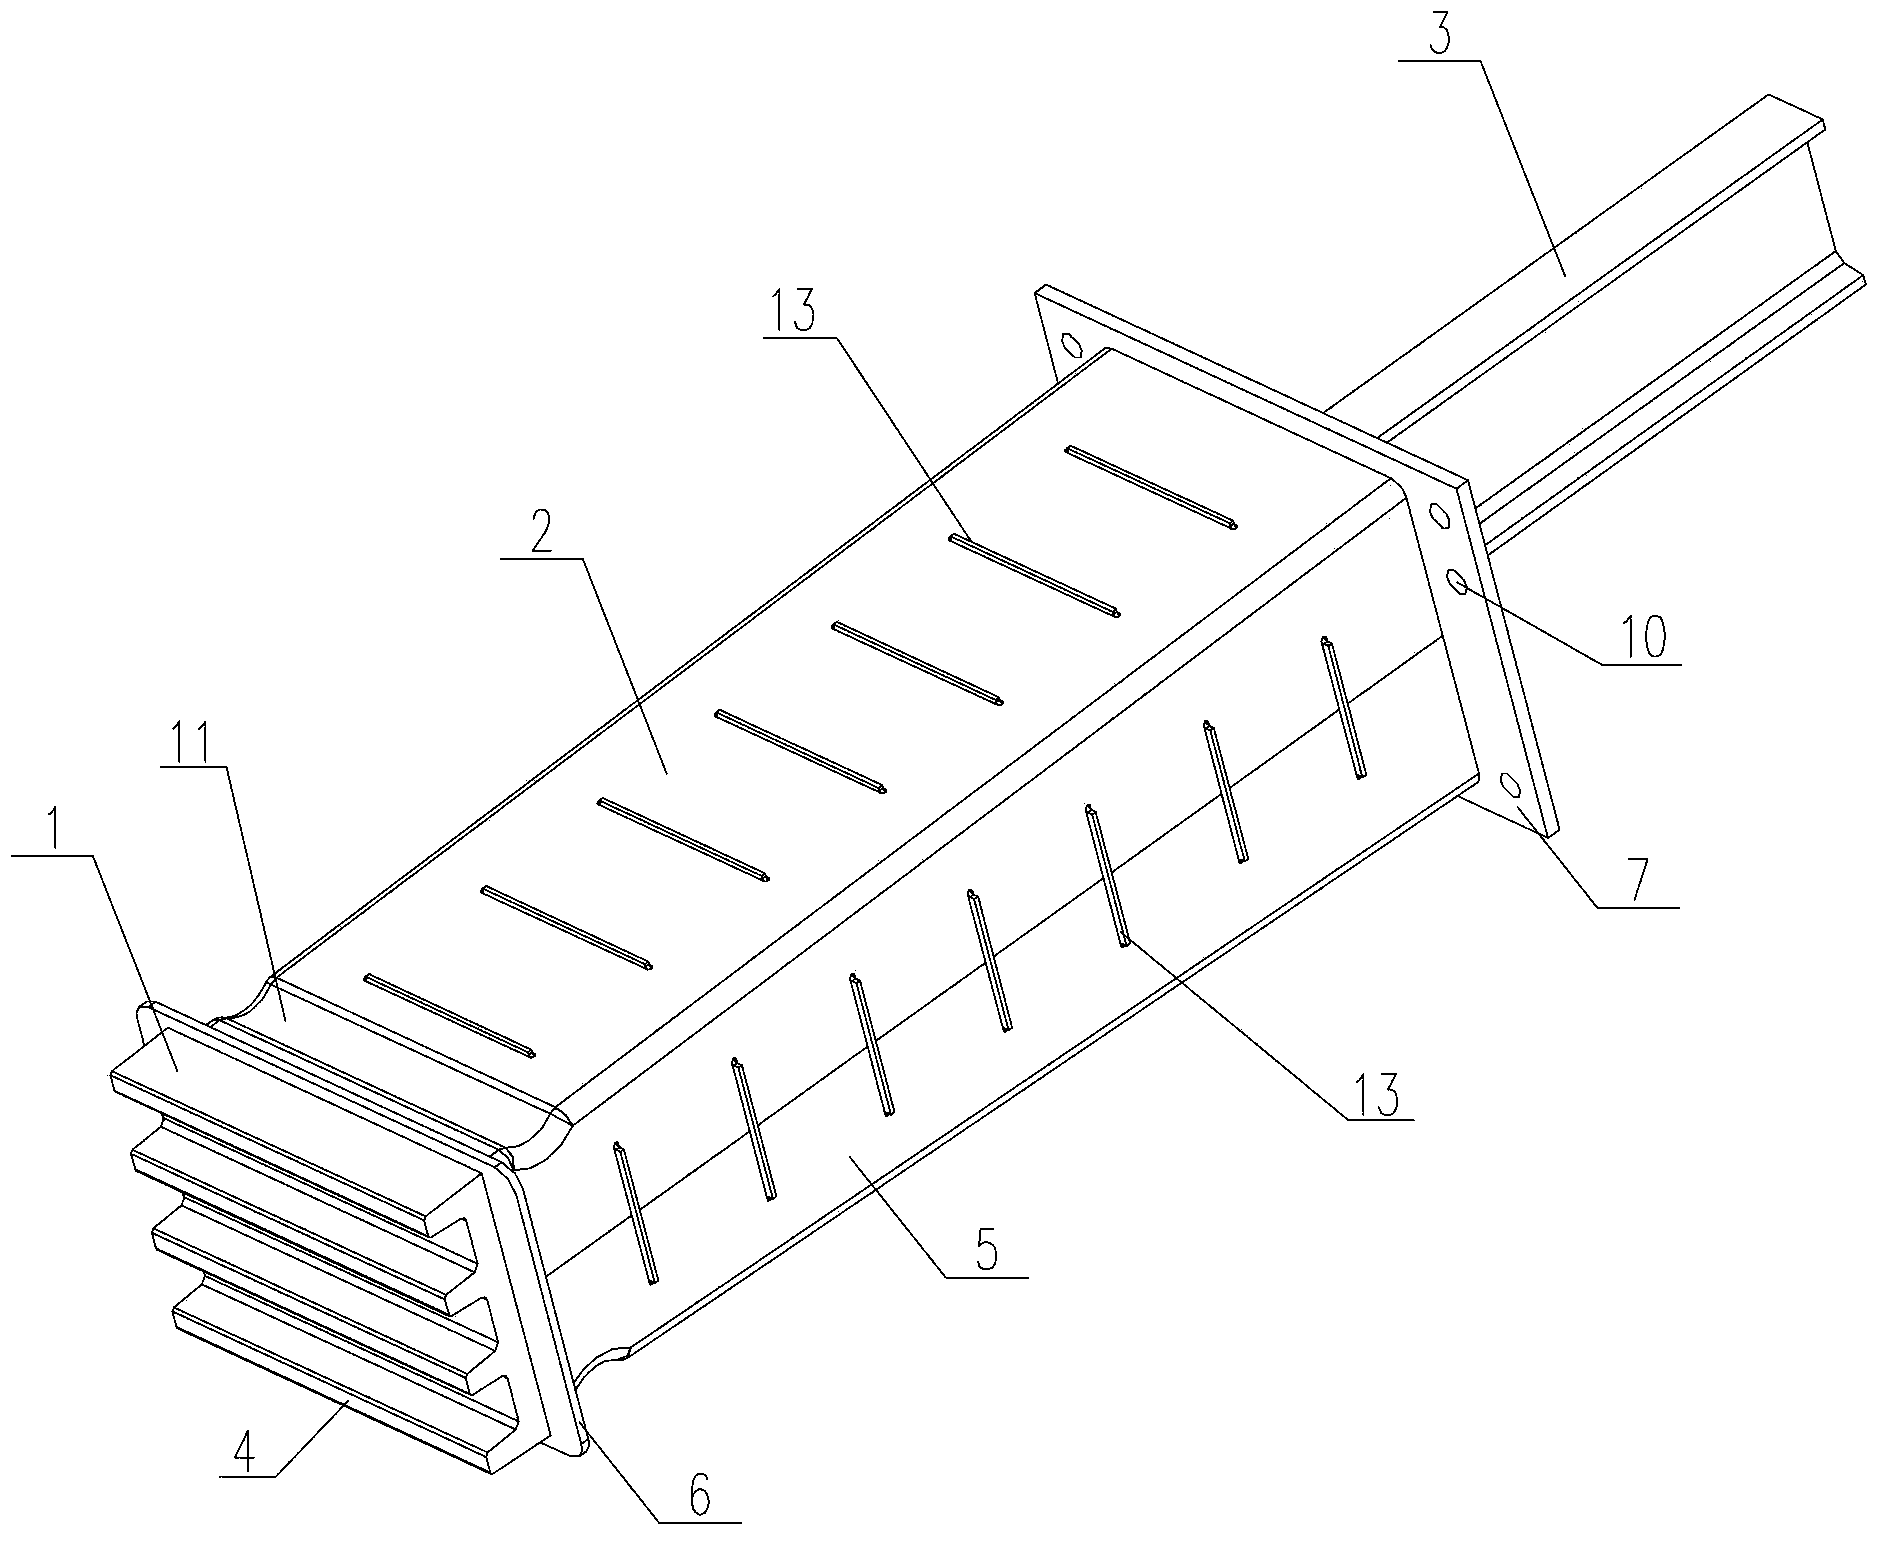 Anti-creeping energy absorption device for railway vehicle